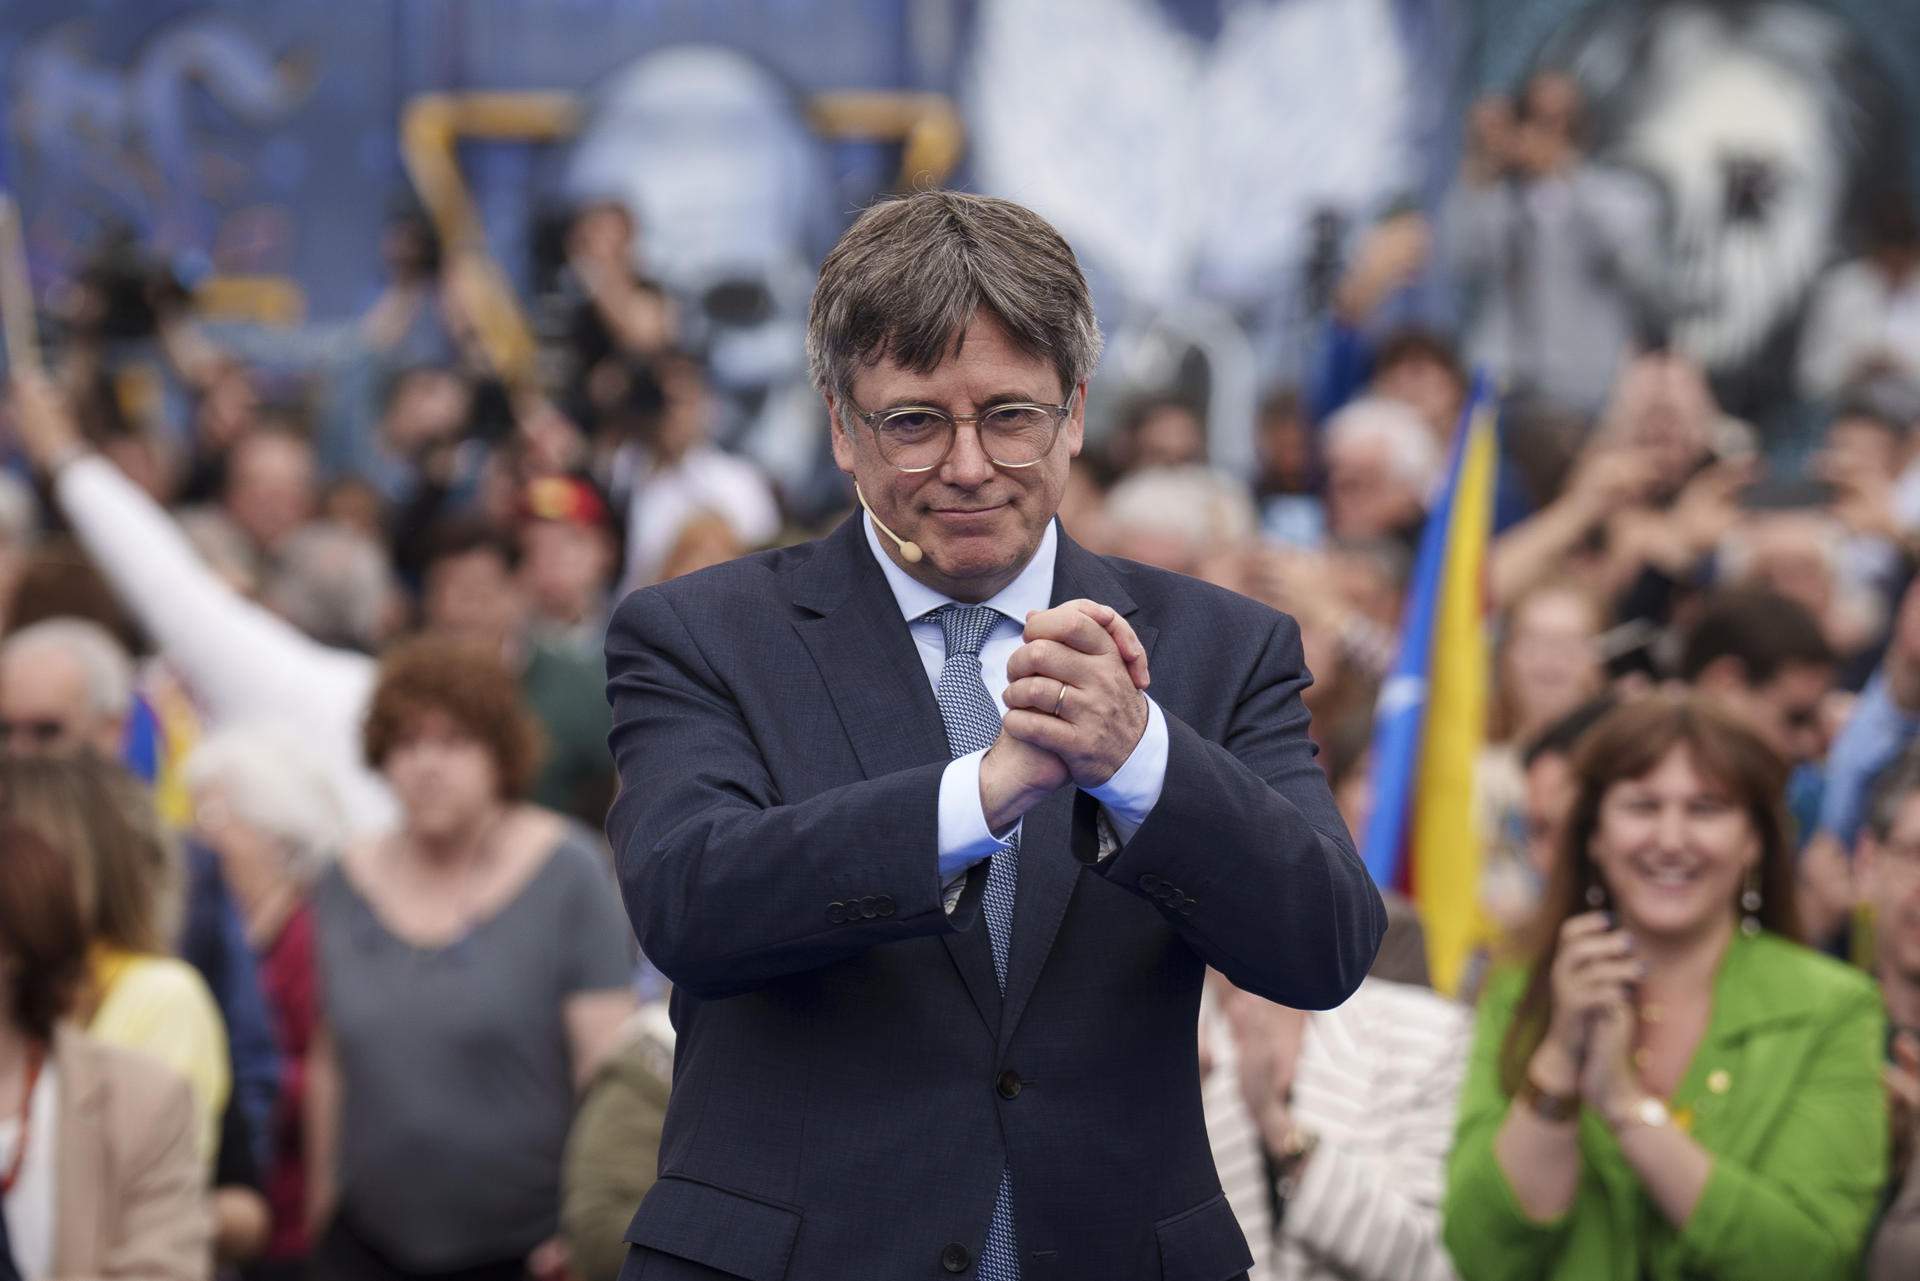 Carles Puigdemont will leave active politics if he is not made president after Catalan election